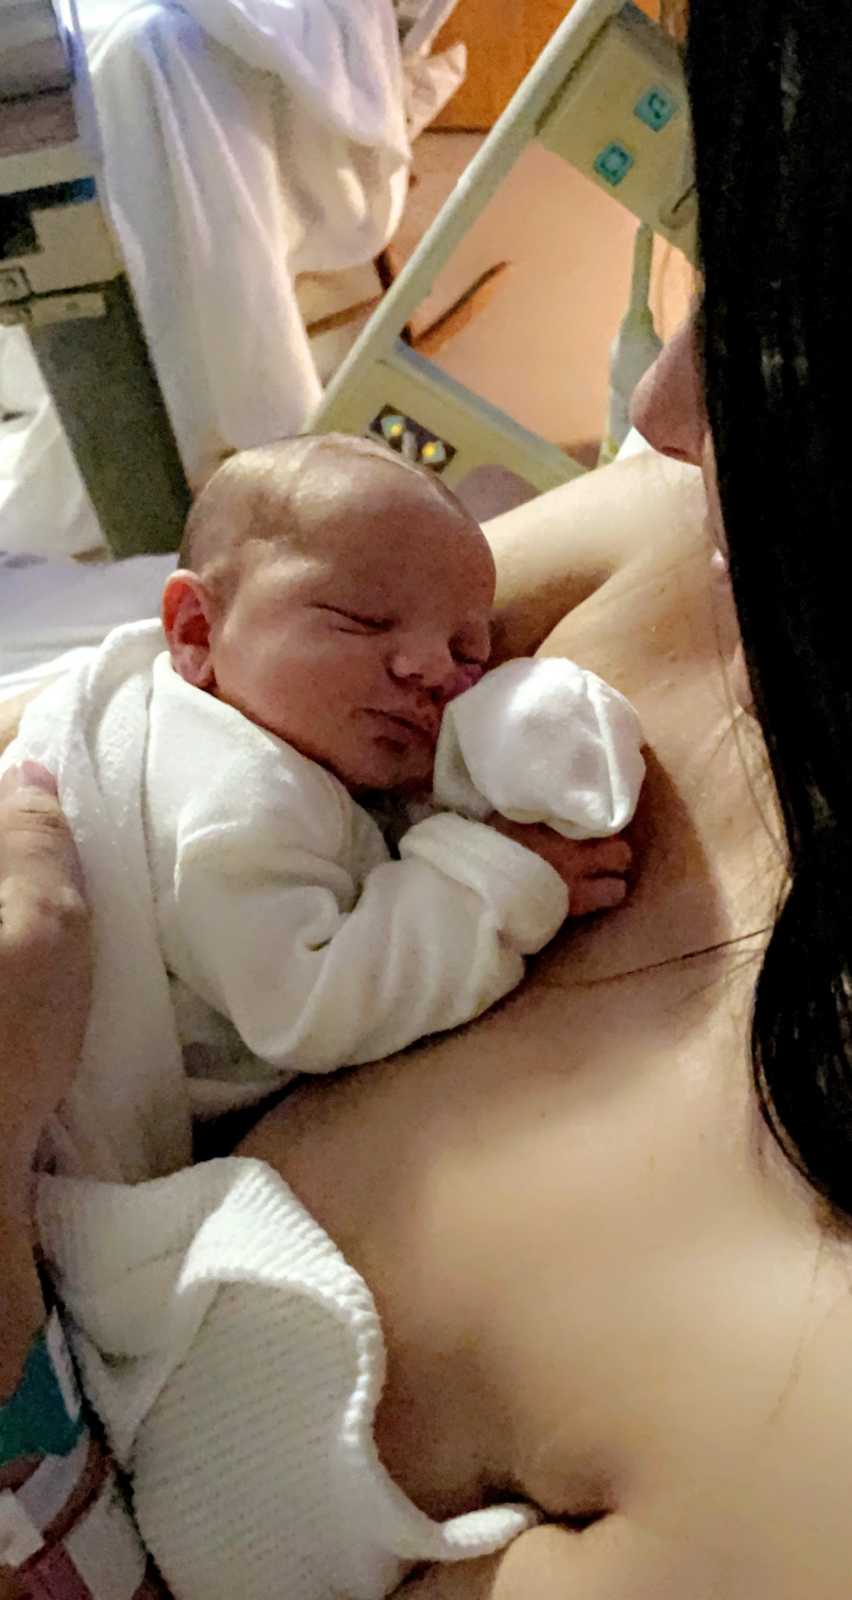 Mom snaps photo of her newborn baby sleeping on her chest after breastfeeding